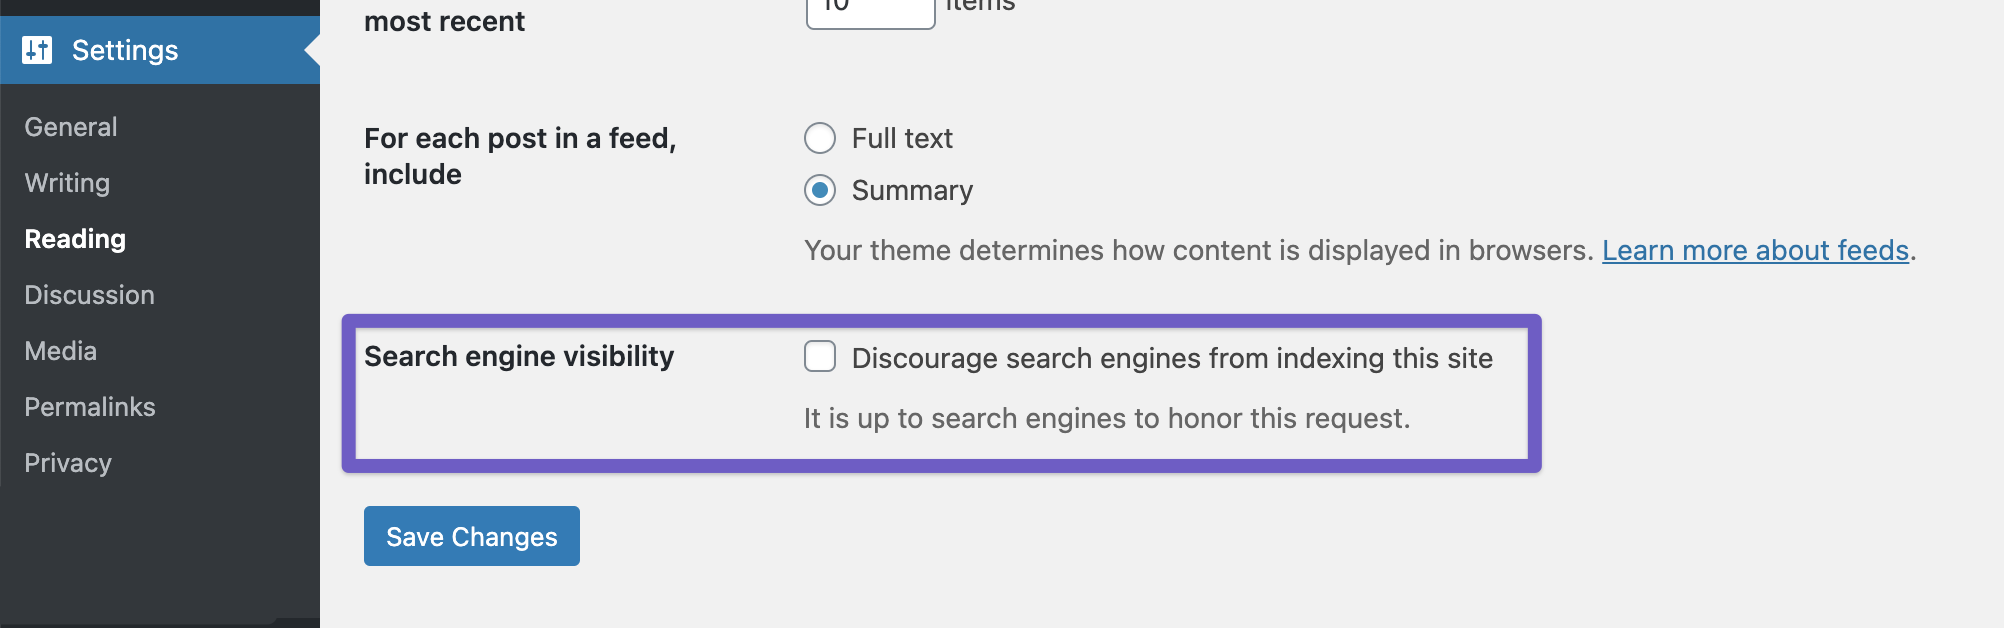 Ensure Search Engine Visibility option is unchecked